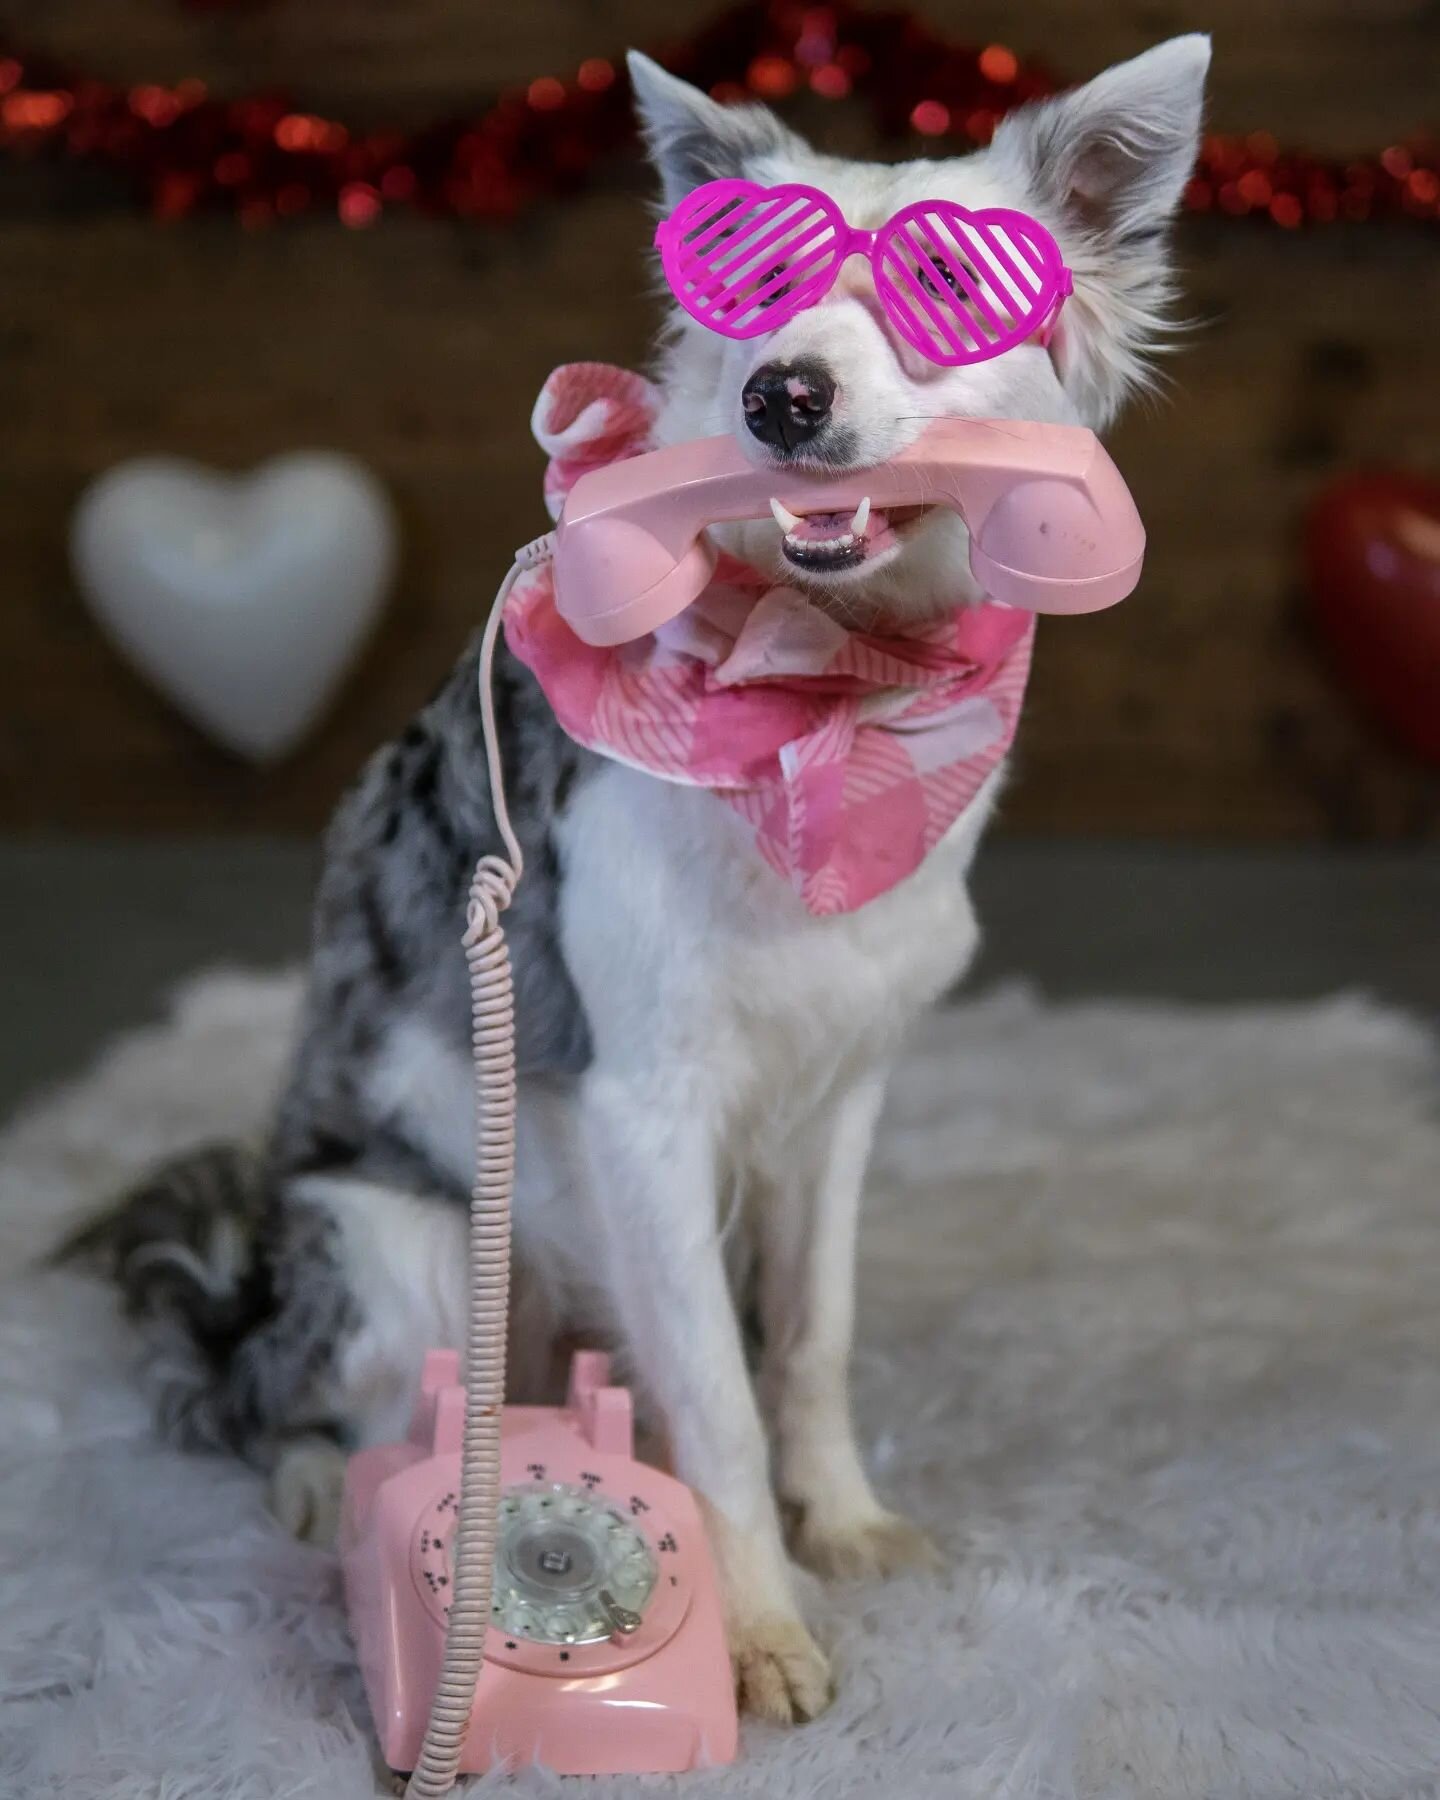 Cupid called, he wants his heart back!
.
Happy Valentines day!
@dingodogphotos